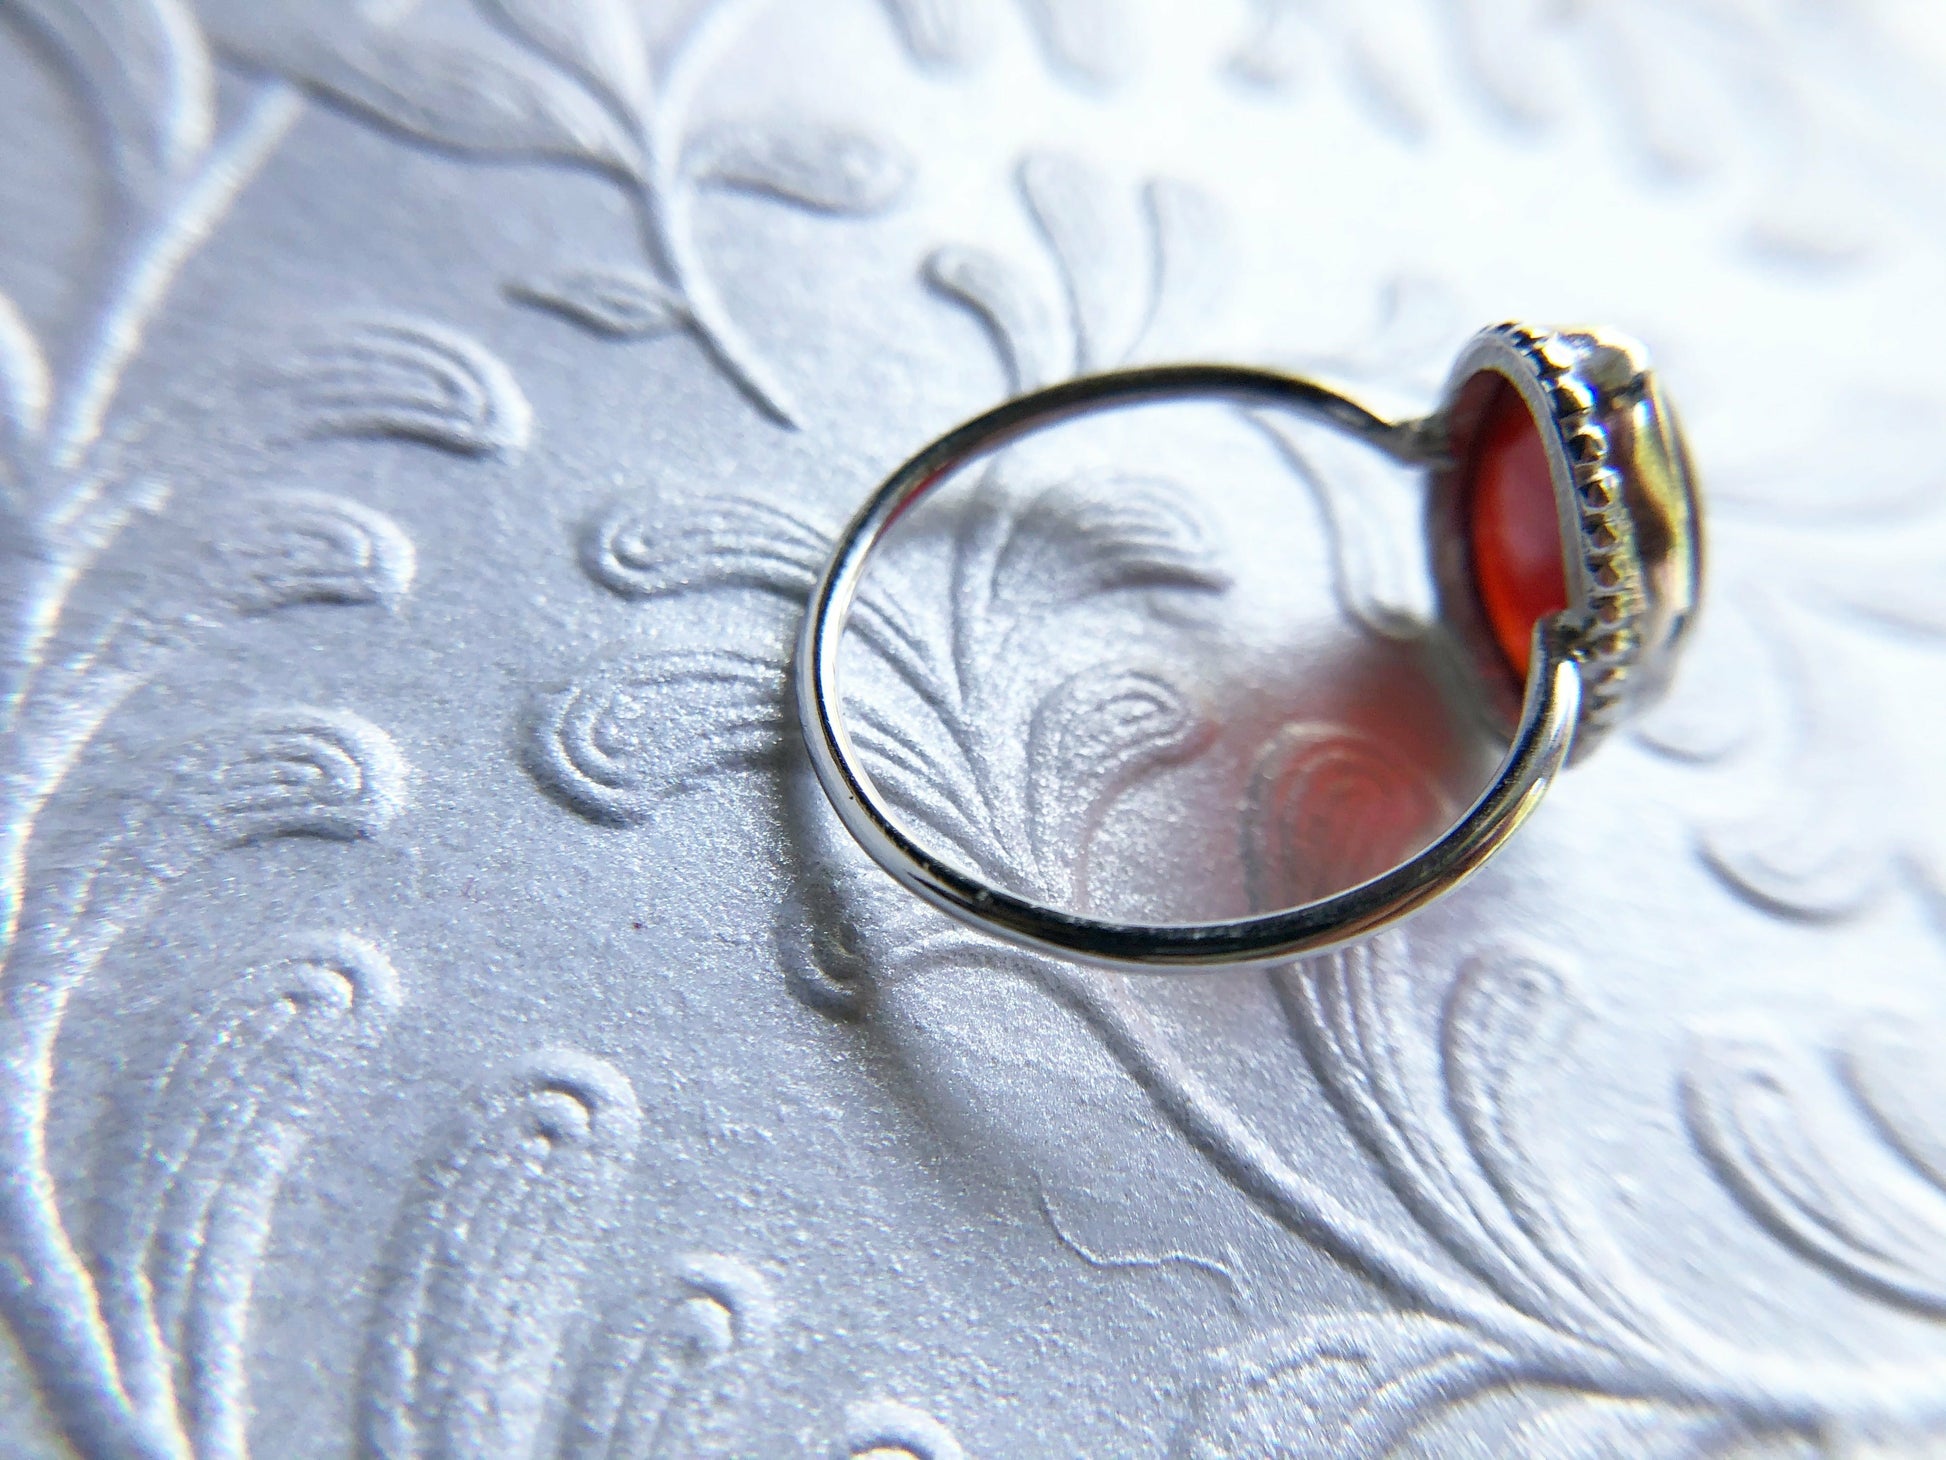 Pear shaped red ring with open back bezel, bezel mounts to the left and right side of the stone.